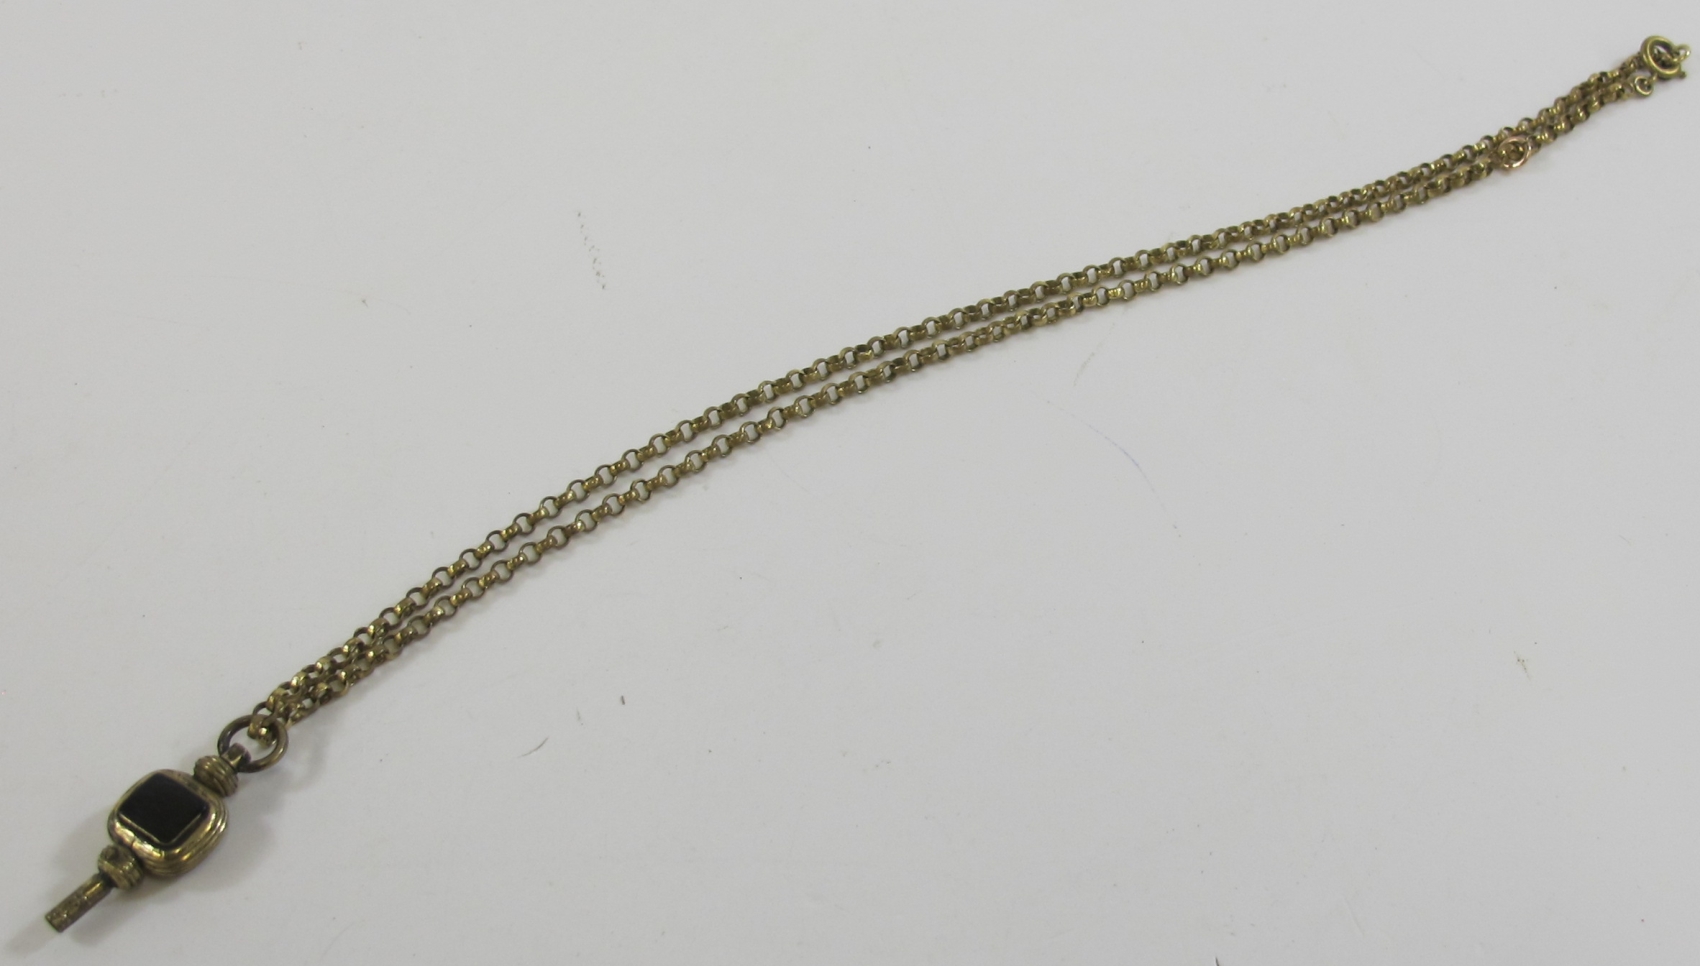 This is a Timed Online Auction on Bidspotter.co.uk, Click here to bid. Antique yellow metal chain - Image 3 of 3